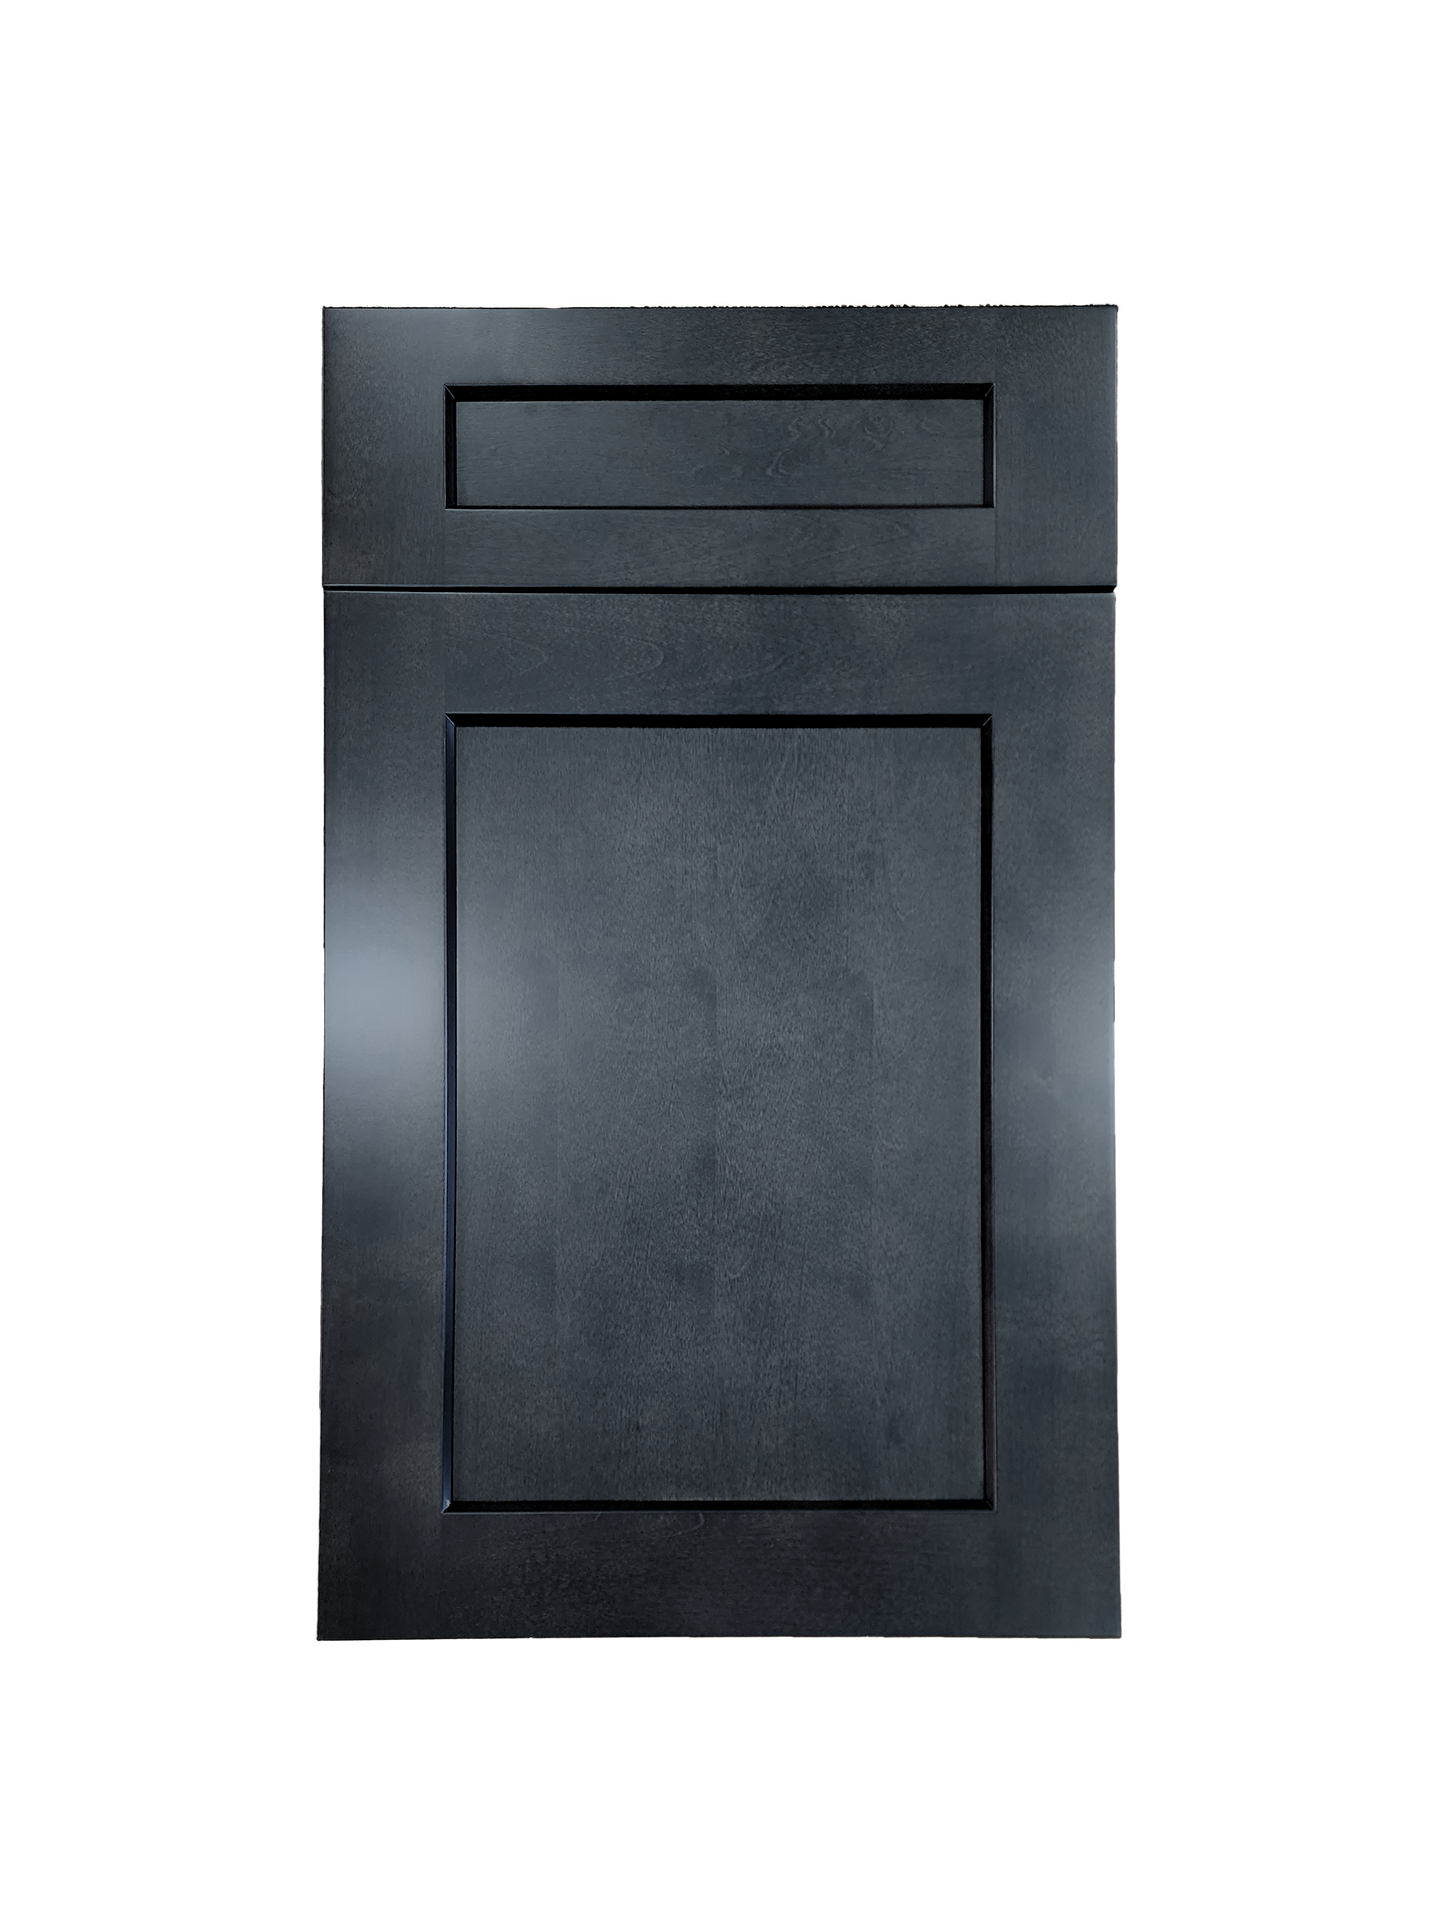 Stormy Grey Wall Cabinet 24 inches wide 12 inches deep 24 inches tall with Stormy Grey box and Stormy Grey doors